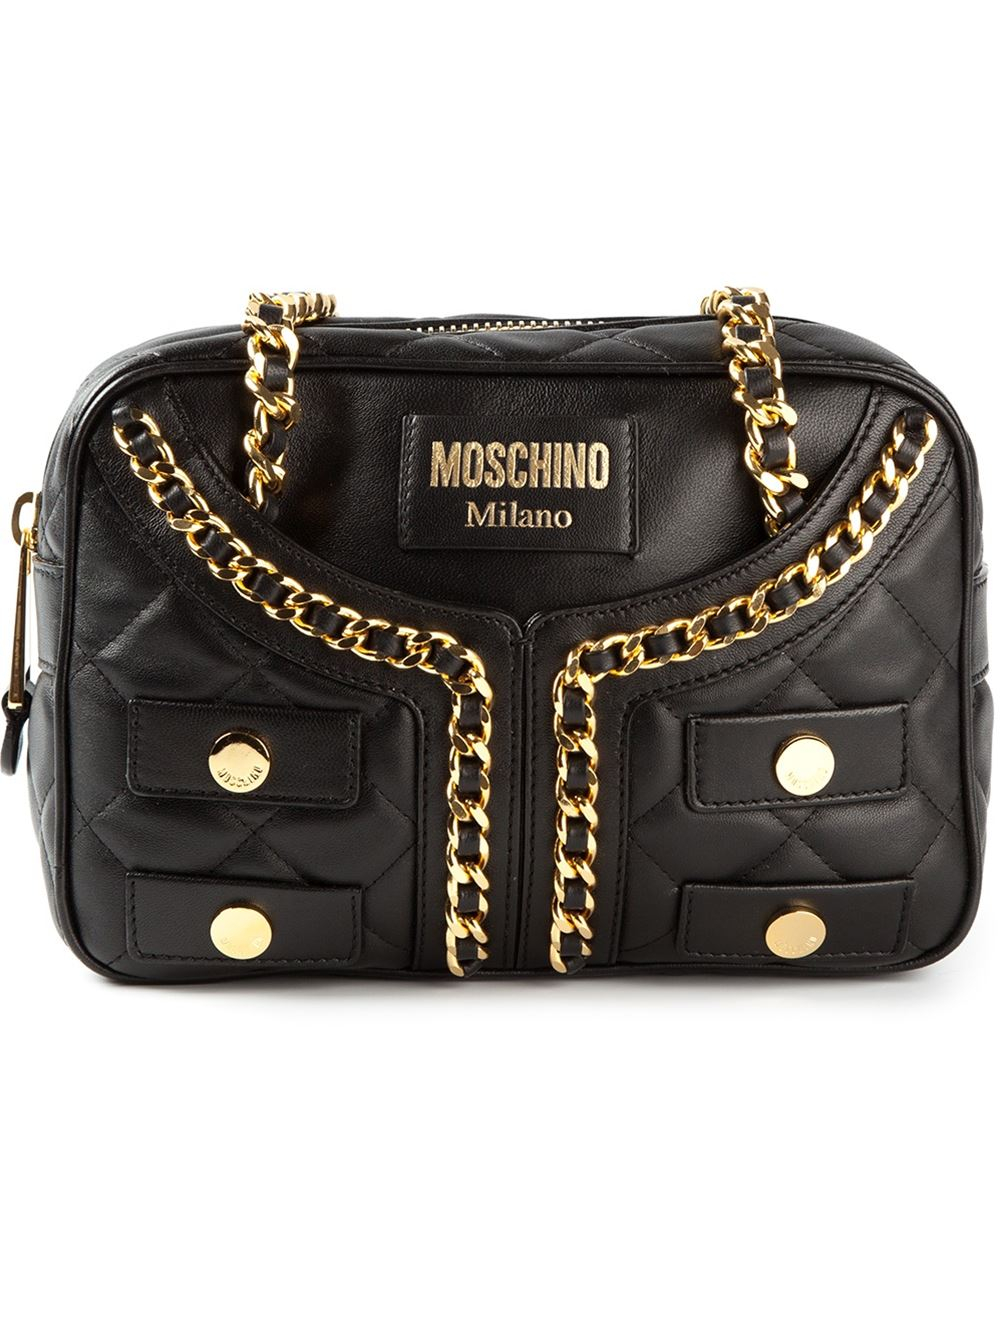 Moschino Quilted Jacket Effect Shoulder Bag in Black - Lyst